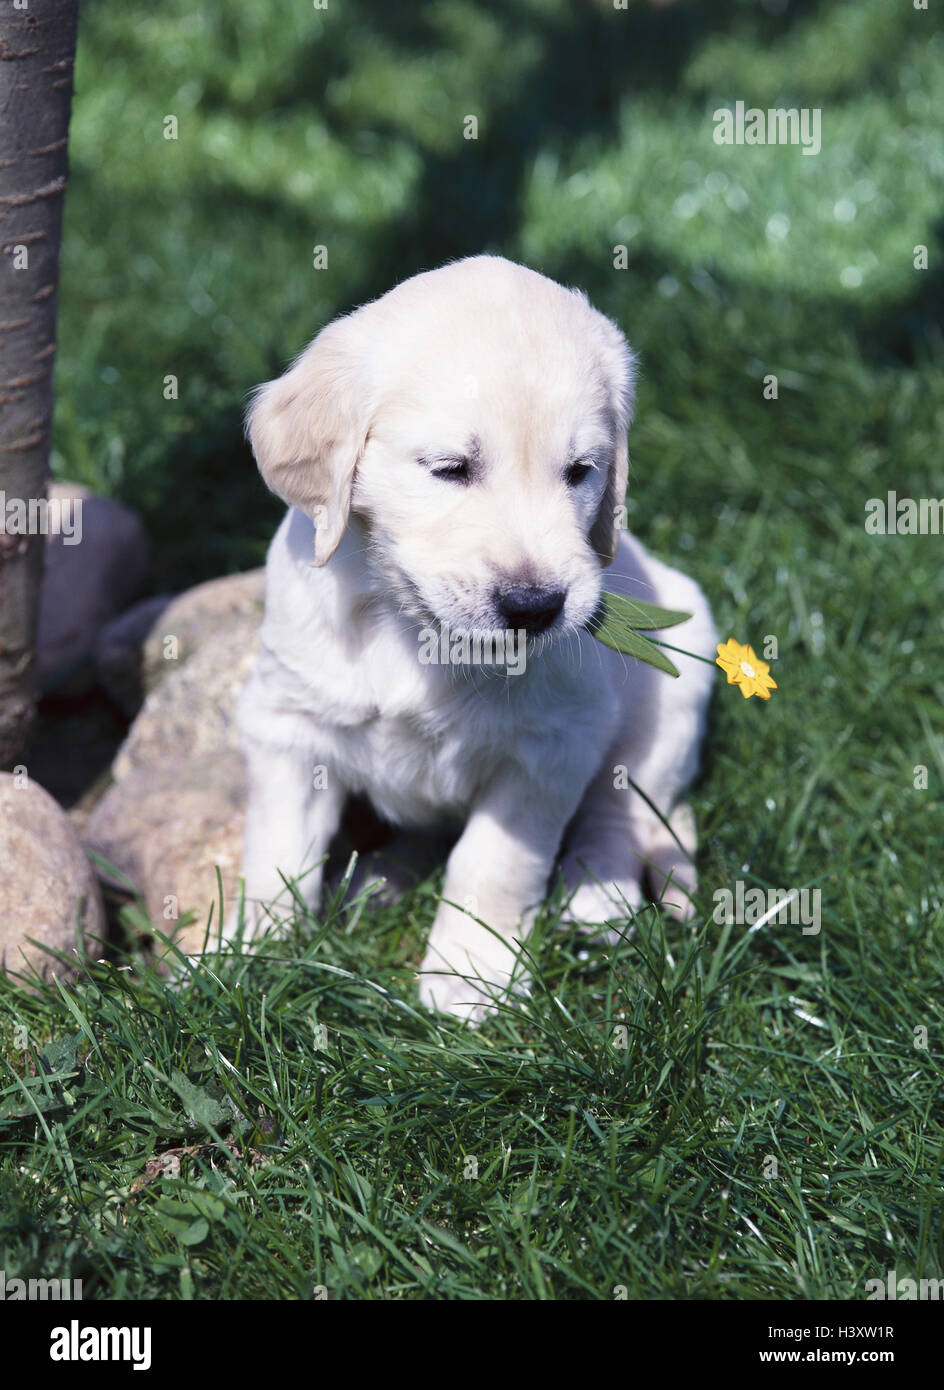 Meadow, Golden retrievers, puppy, sit, garden, animal, animals, mammal, mammals, dog, young, white, small, dogs, mouth, artificial flower, Canidae, young animal, young animals, dog puppy, puppy, pet, pets, dog breed, pedigree dog, race, pet dog, to pet do Stock Photo